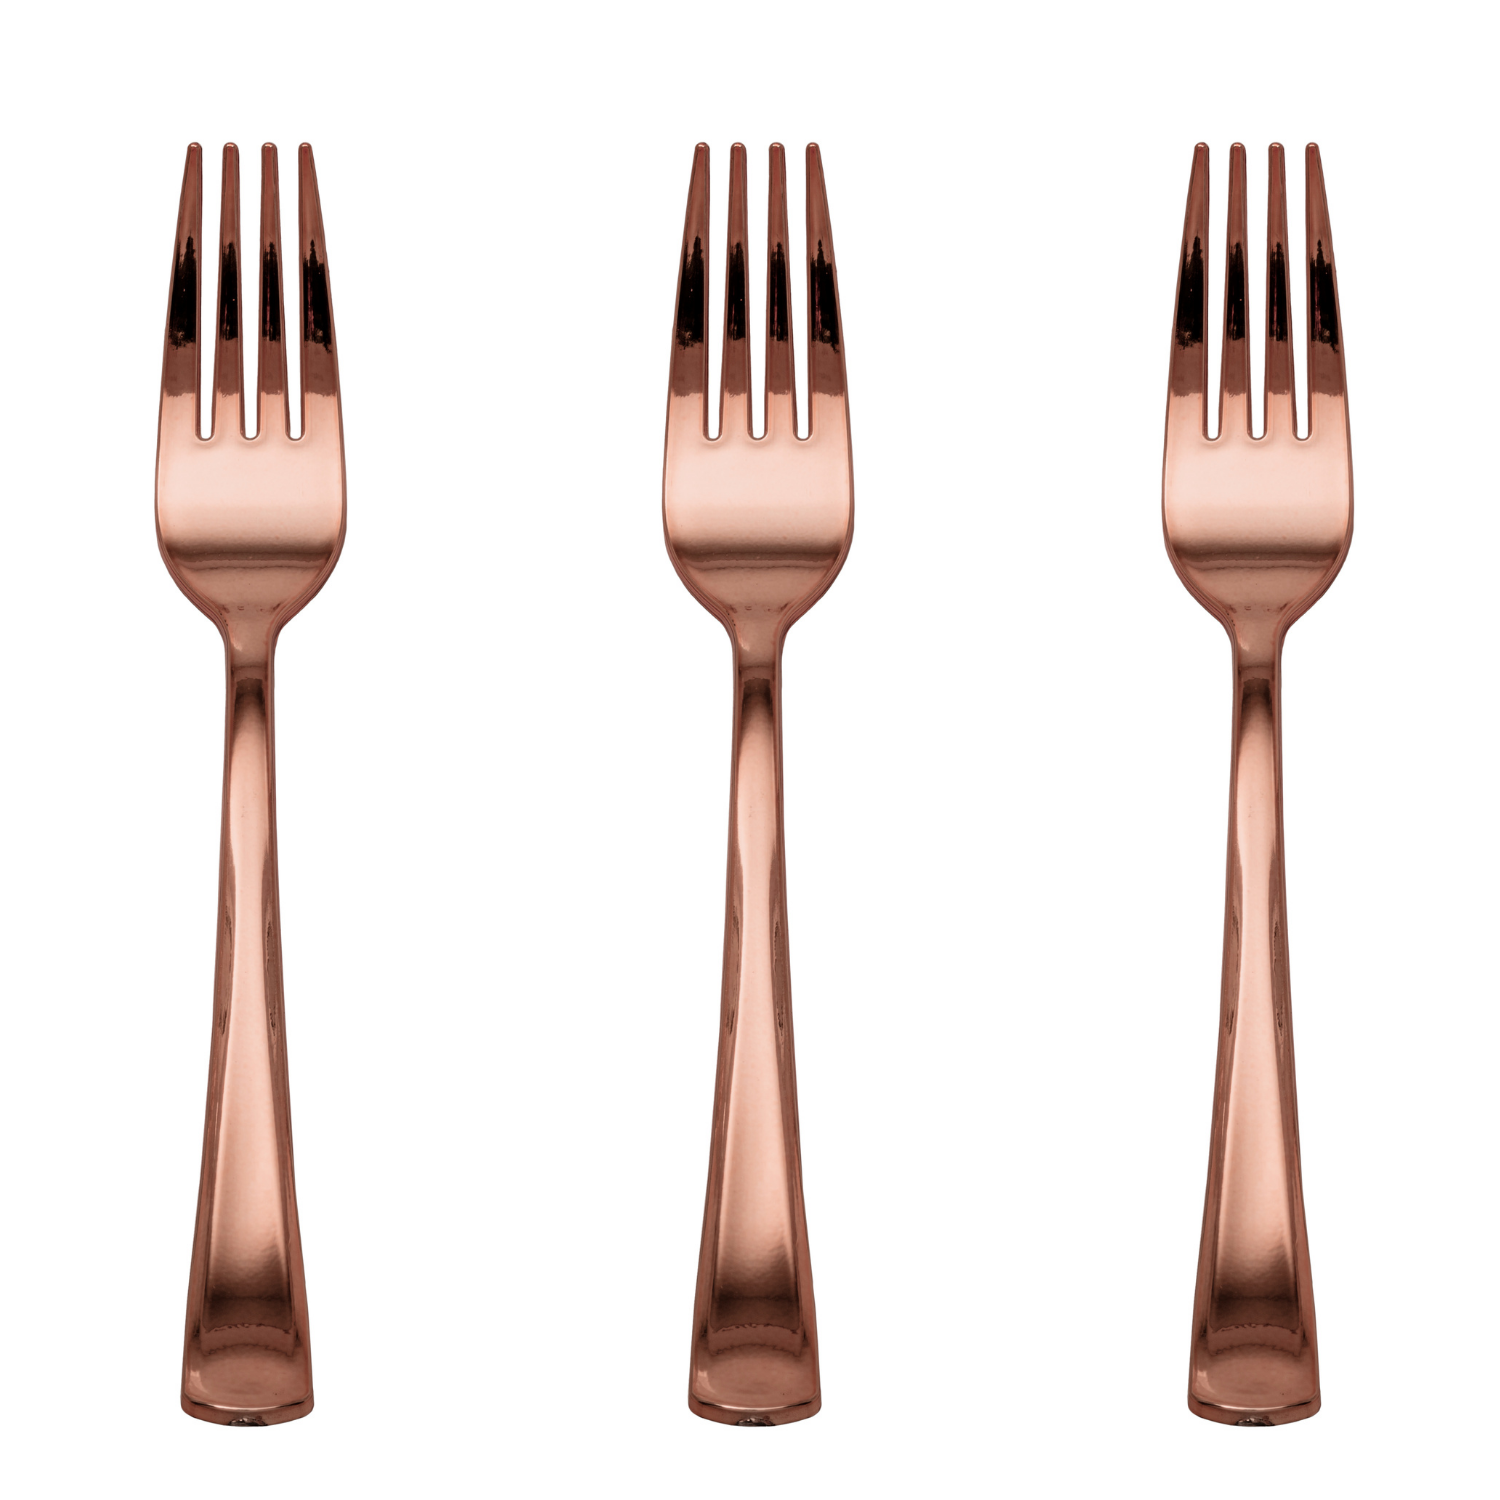 Details about   Rose Gold Plastic Silverware Set,120 Piece Cutlery Includes Forks Spoons Knives 